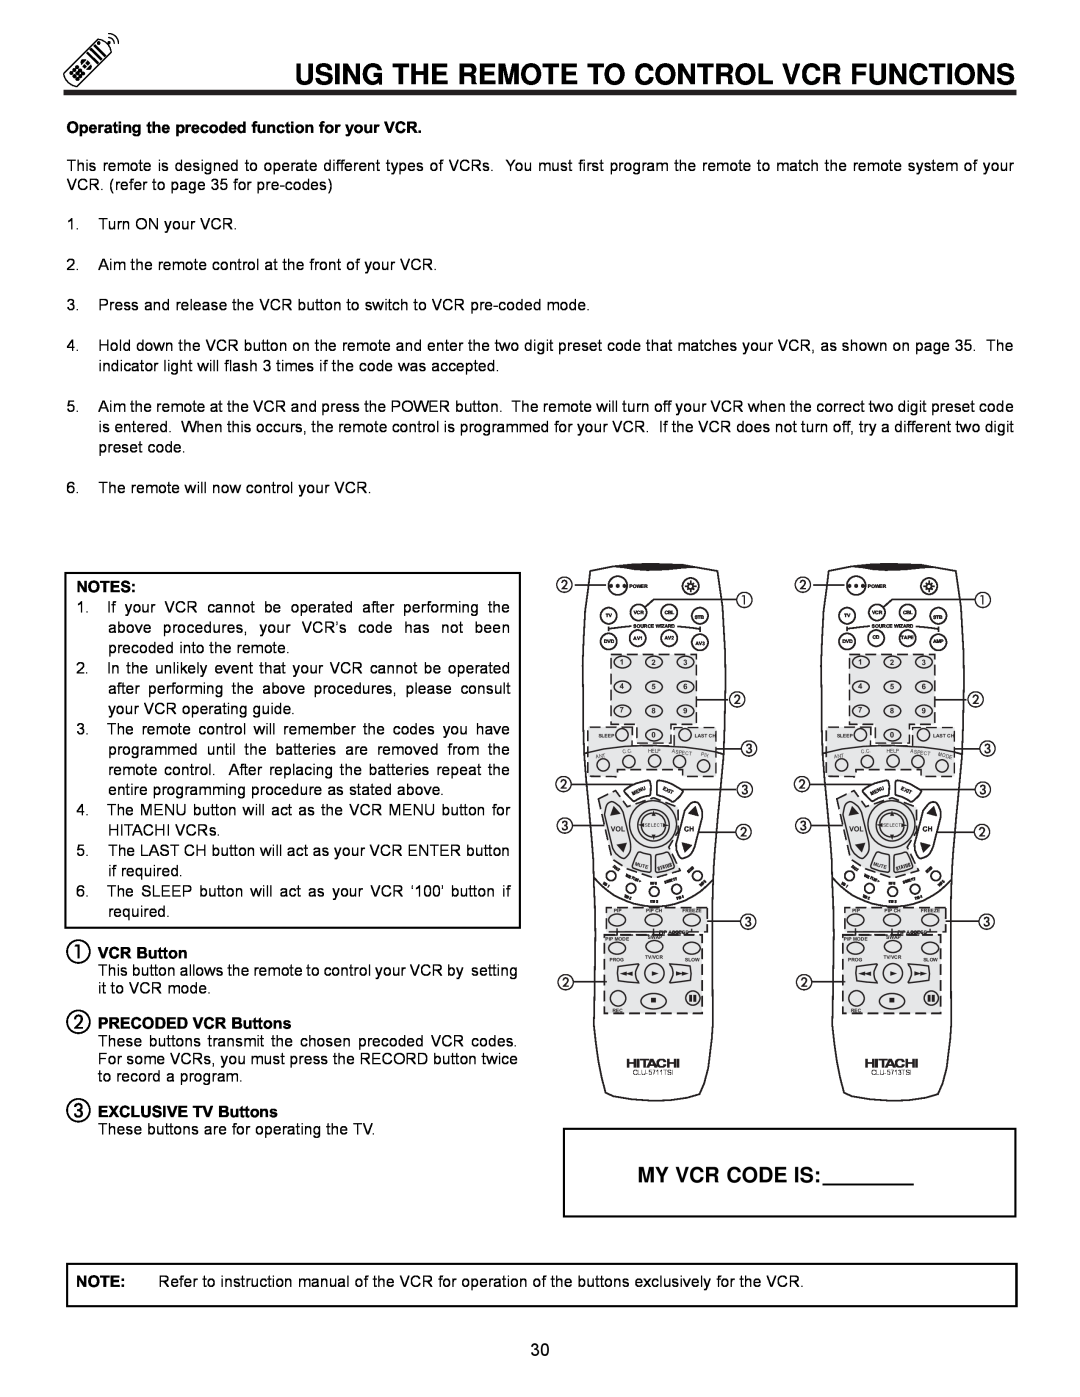 Hitachi 61UWX10B important safety instructions Using The Remote To Control Vcr Functions, My Vcr Code Is 